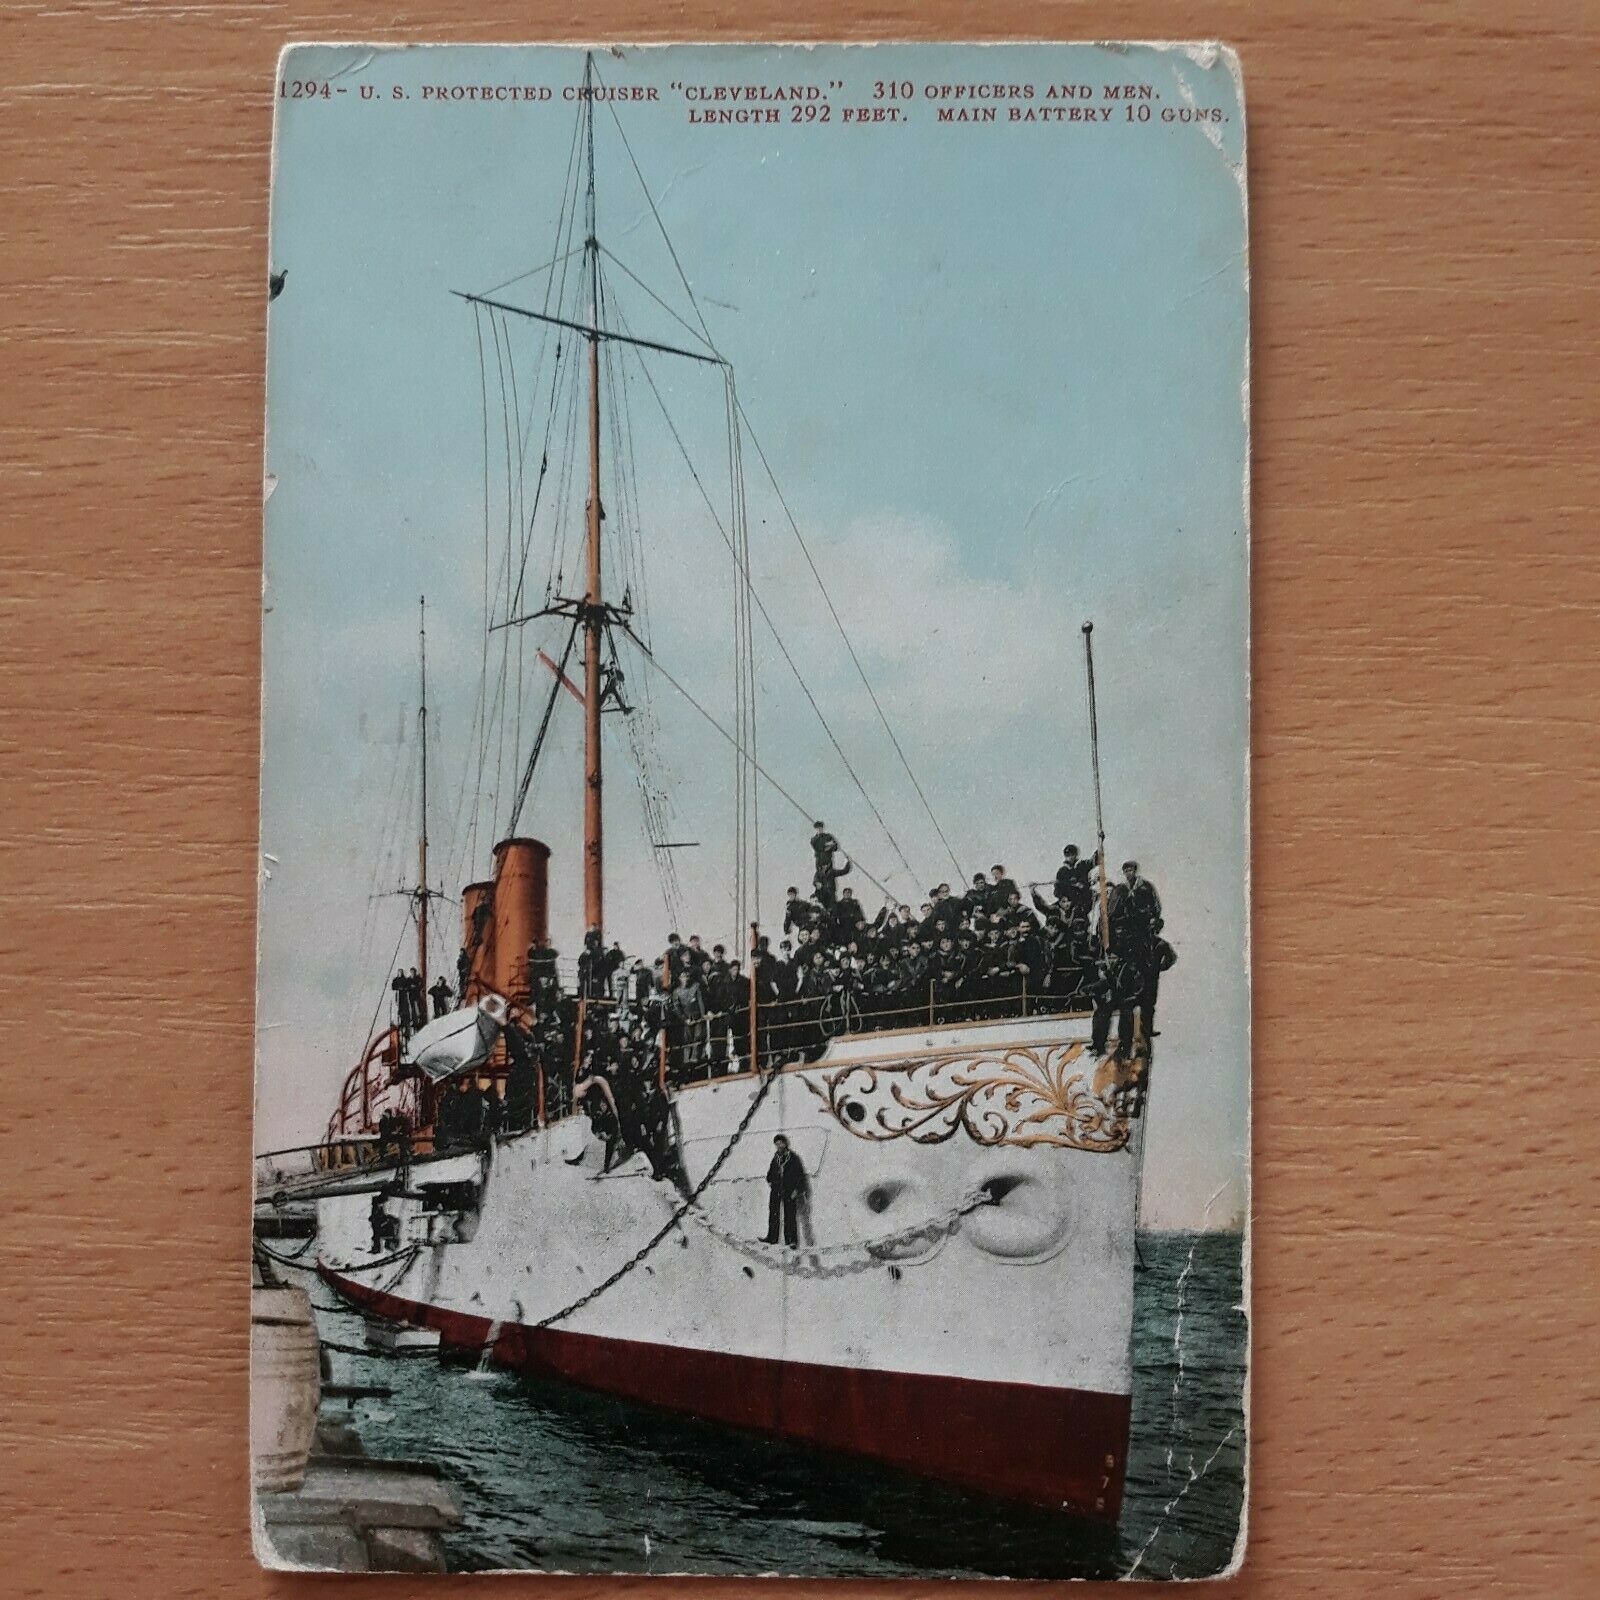 House Clearance - Service U.S. Protected Cruiser "Cleveland" Old 1913 Service